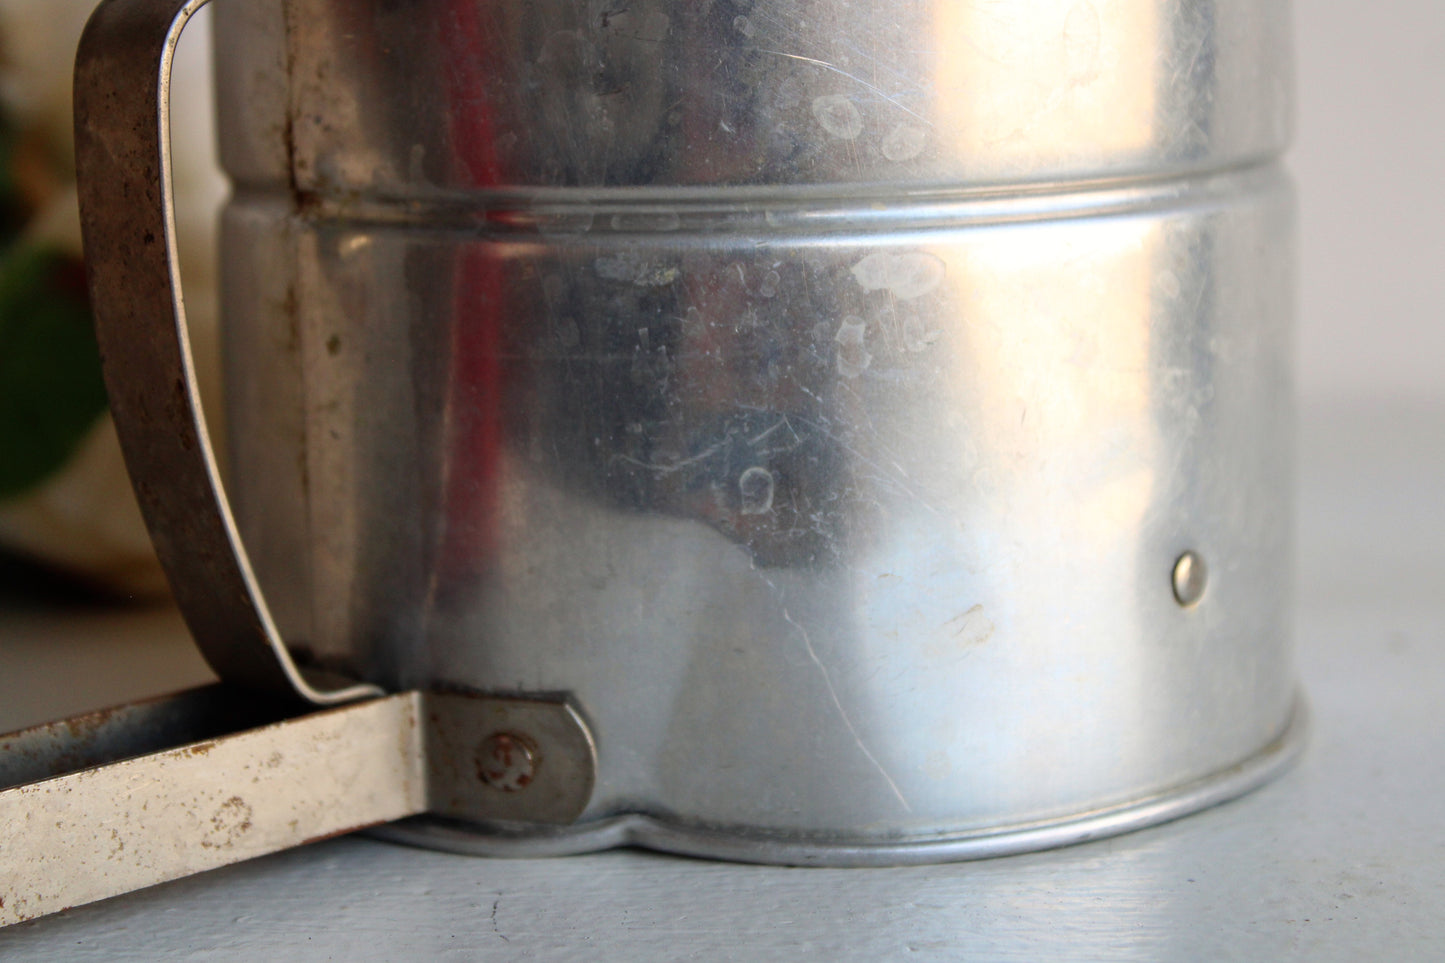 Vintage 1930s 1940s HandiSift Flour Sifter